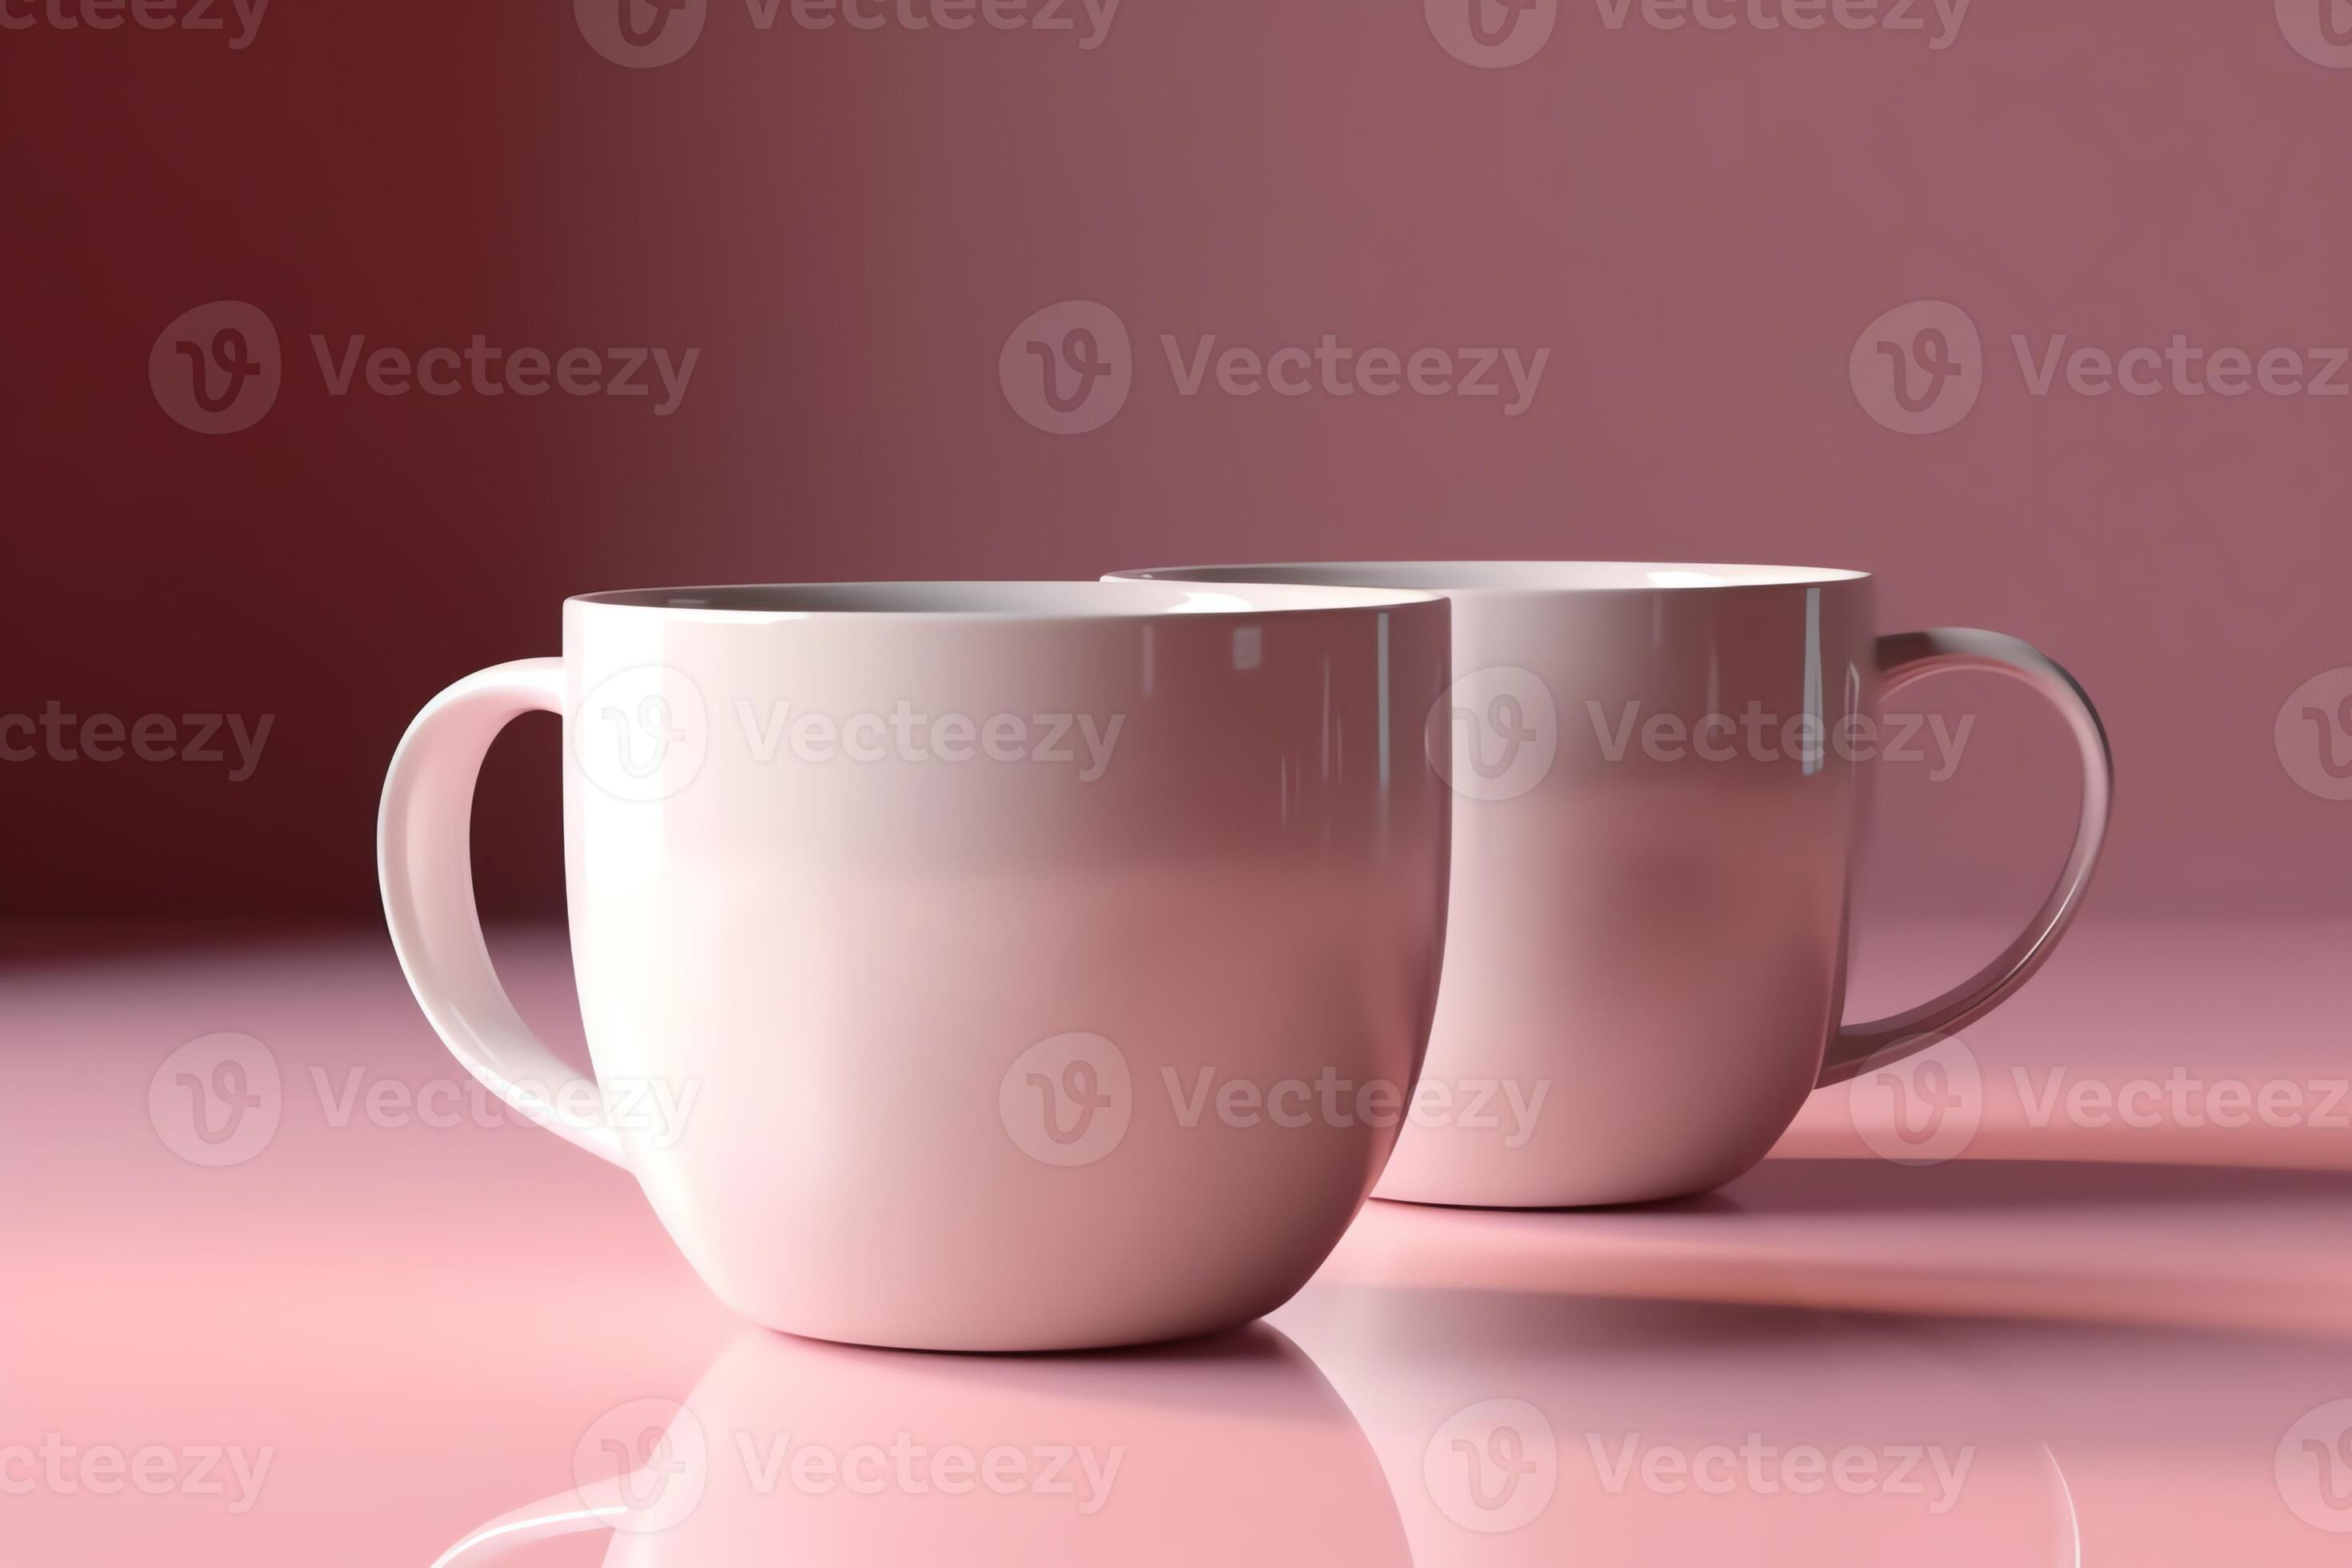 https://static.vecteezy.com/system/resources/previews/023/379/927/large_2x/2-white-blank-coffee-mugs-with-handle-on-pink-background-with-reflection-3d-render-scene-with-cup-in-air-ai-generated-photo.jpg